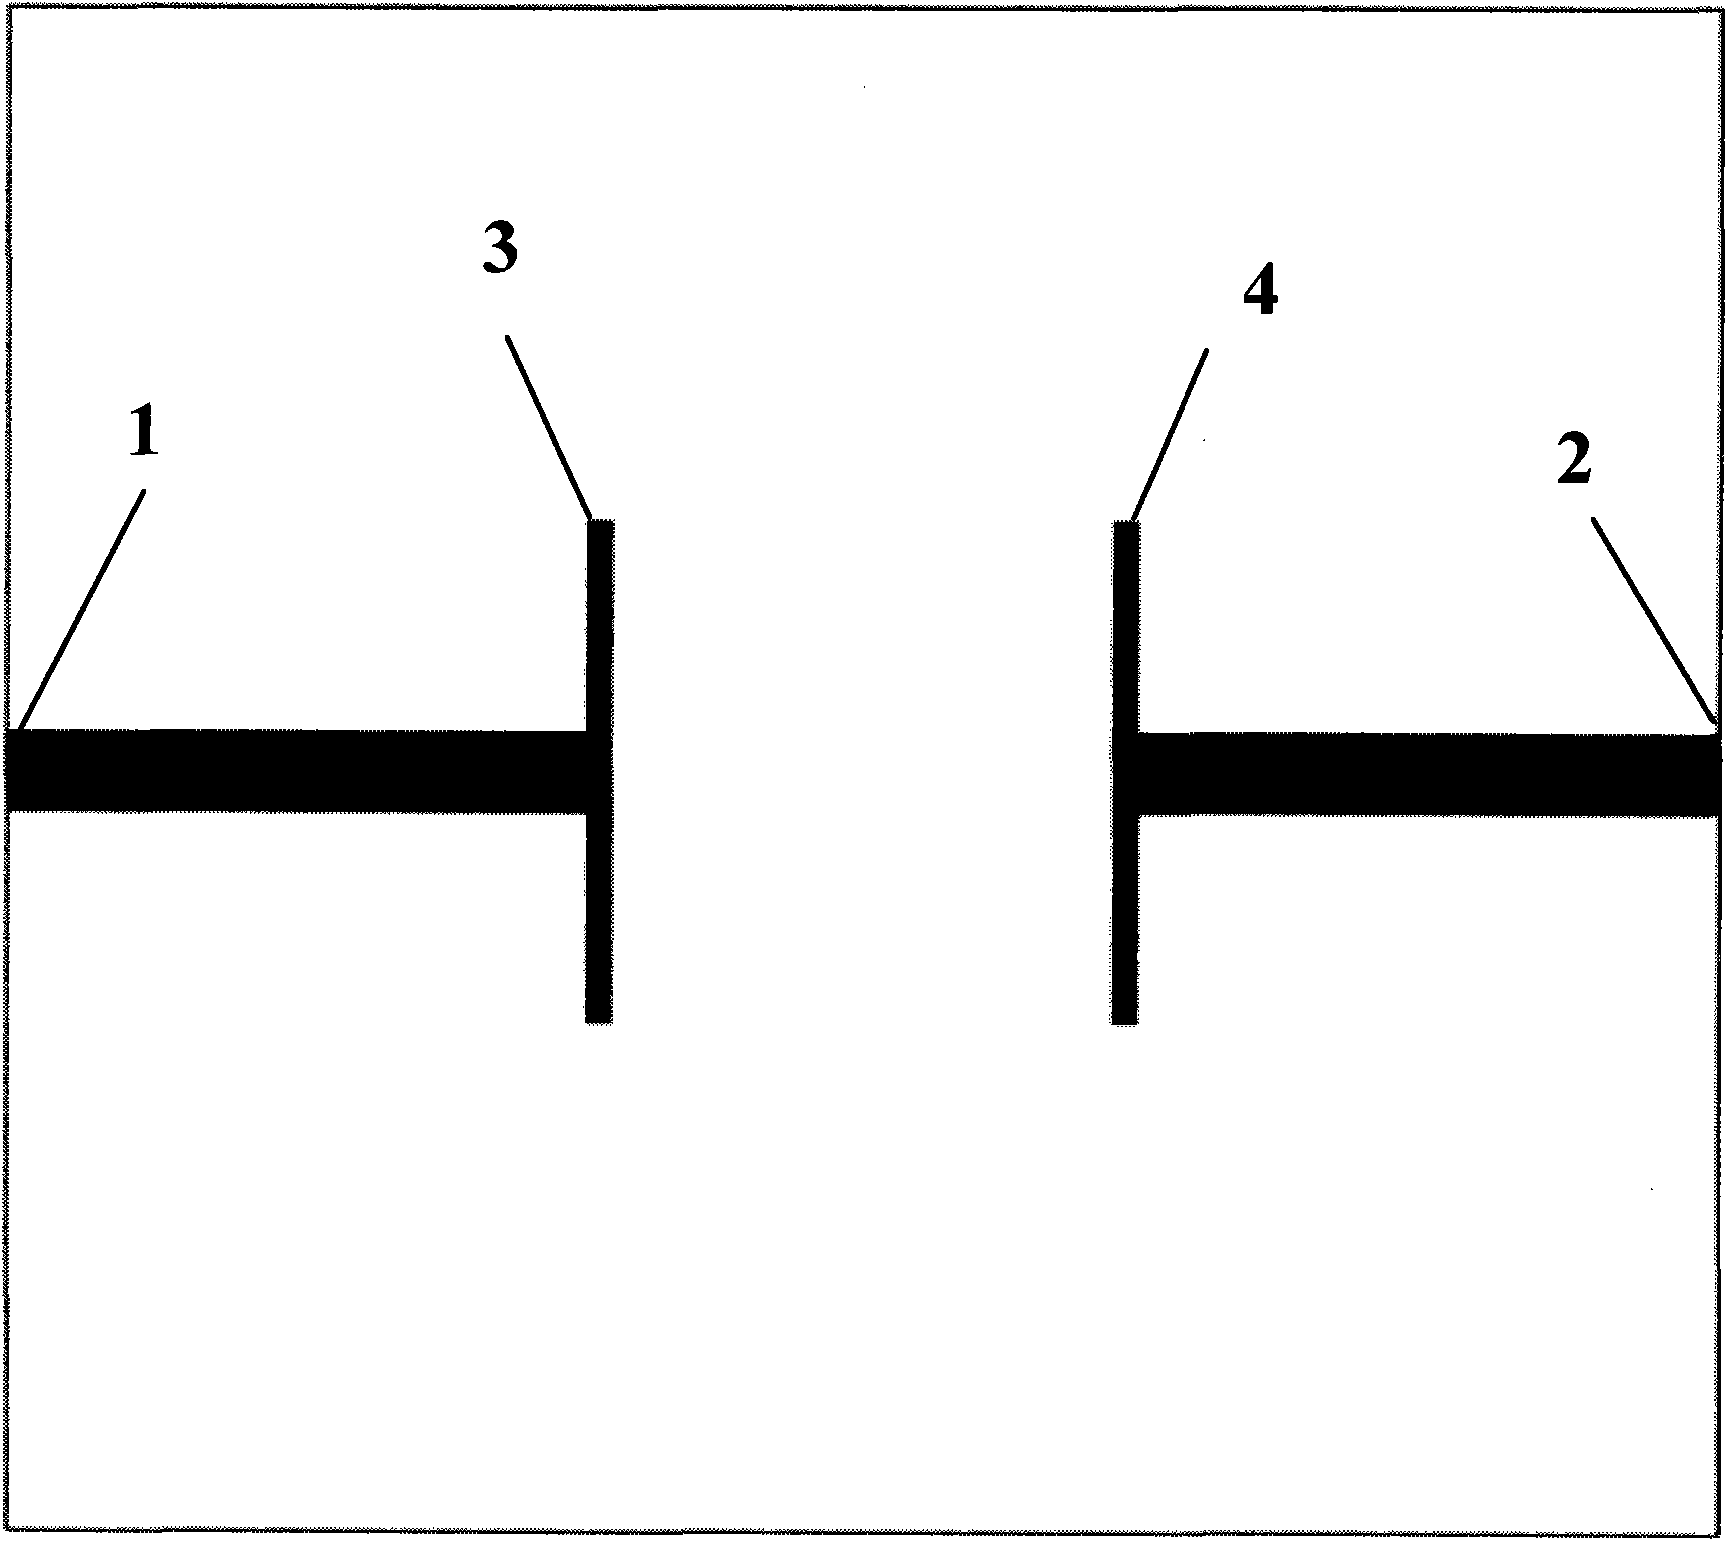 Bent dual-band bandpass filter applying defected ground level waveguide technology